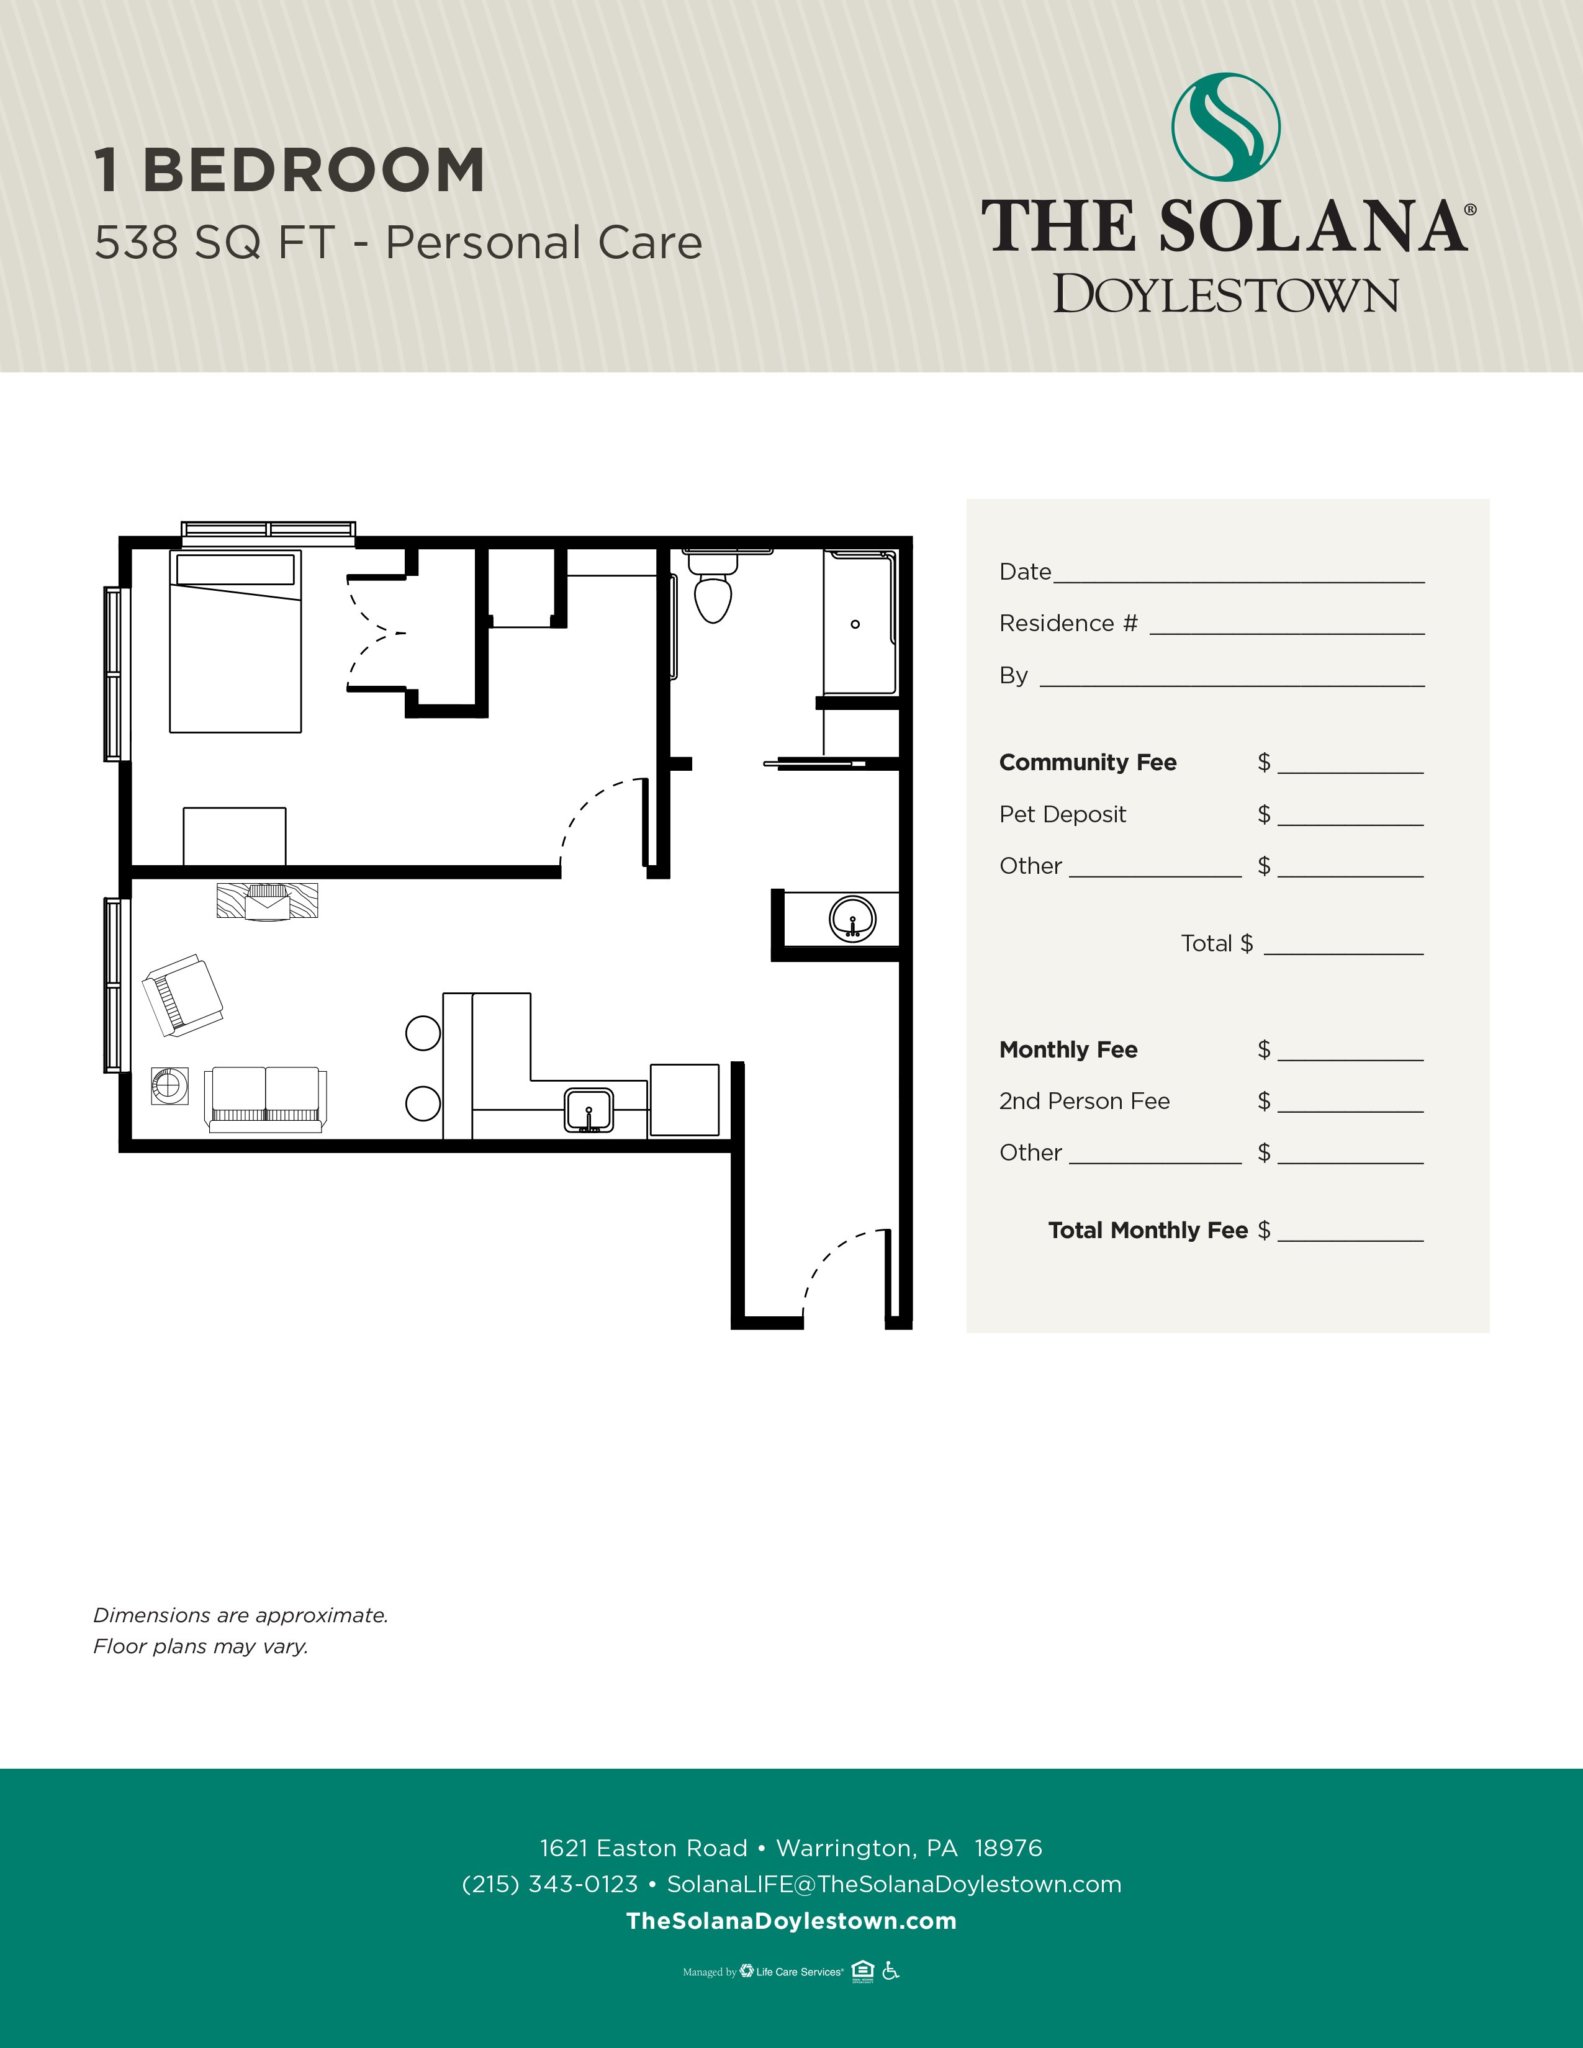 1 bedroom, 538 square feet personal care unit floor plan at The Solana Doylestown.